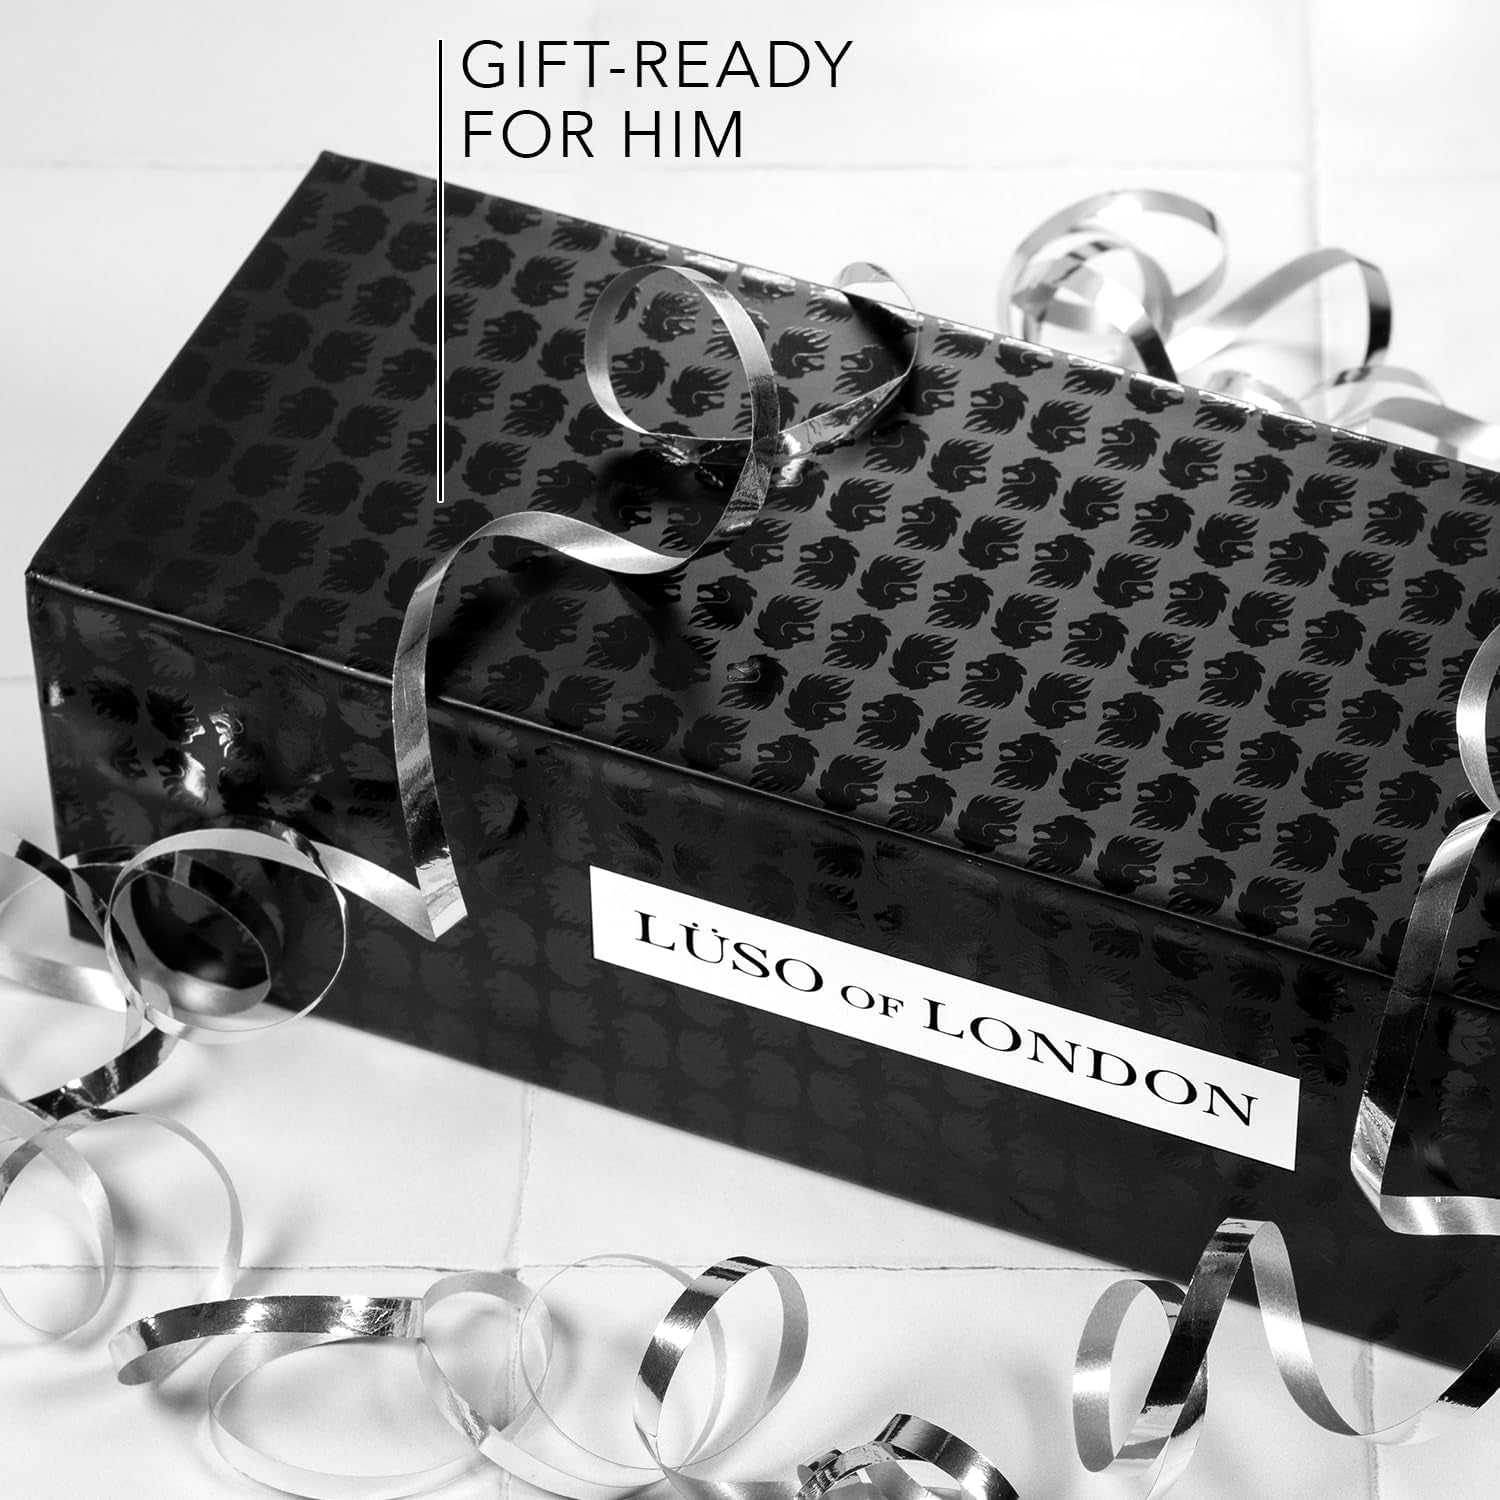 "Lüso of London - Bold and Masculine Scented Candles for Men, 3 Luxurious Candles in a Stylish Black Gift Box. The Ultimate Candle Set for the Modern Gentleman. Perfect Gifts for Men."